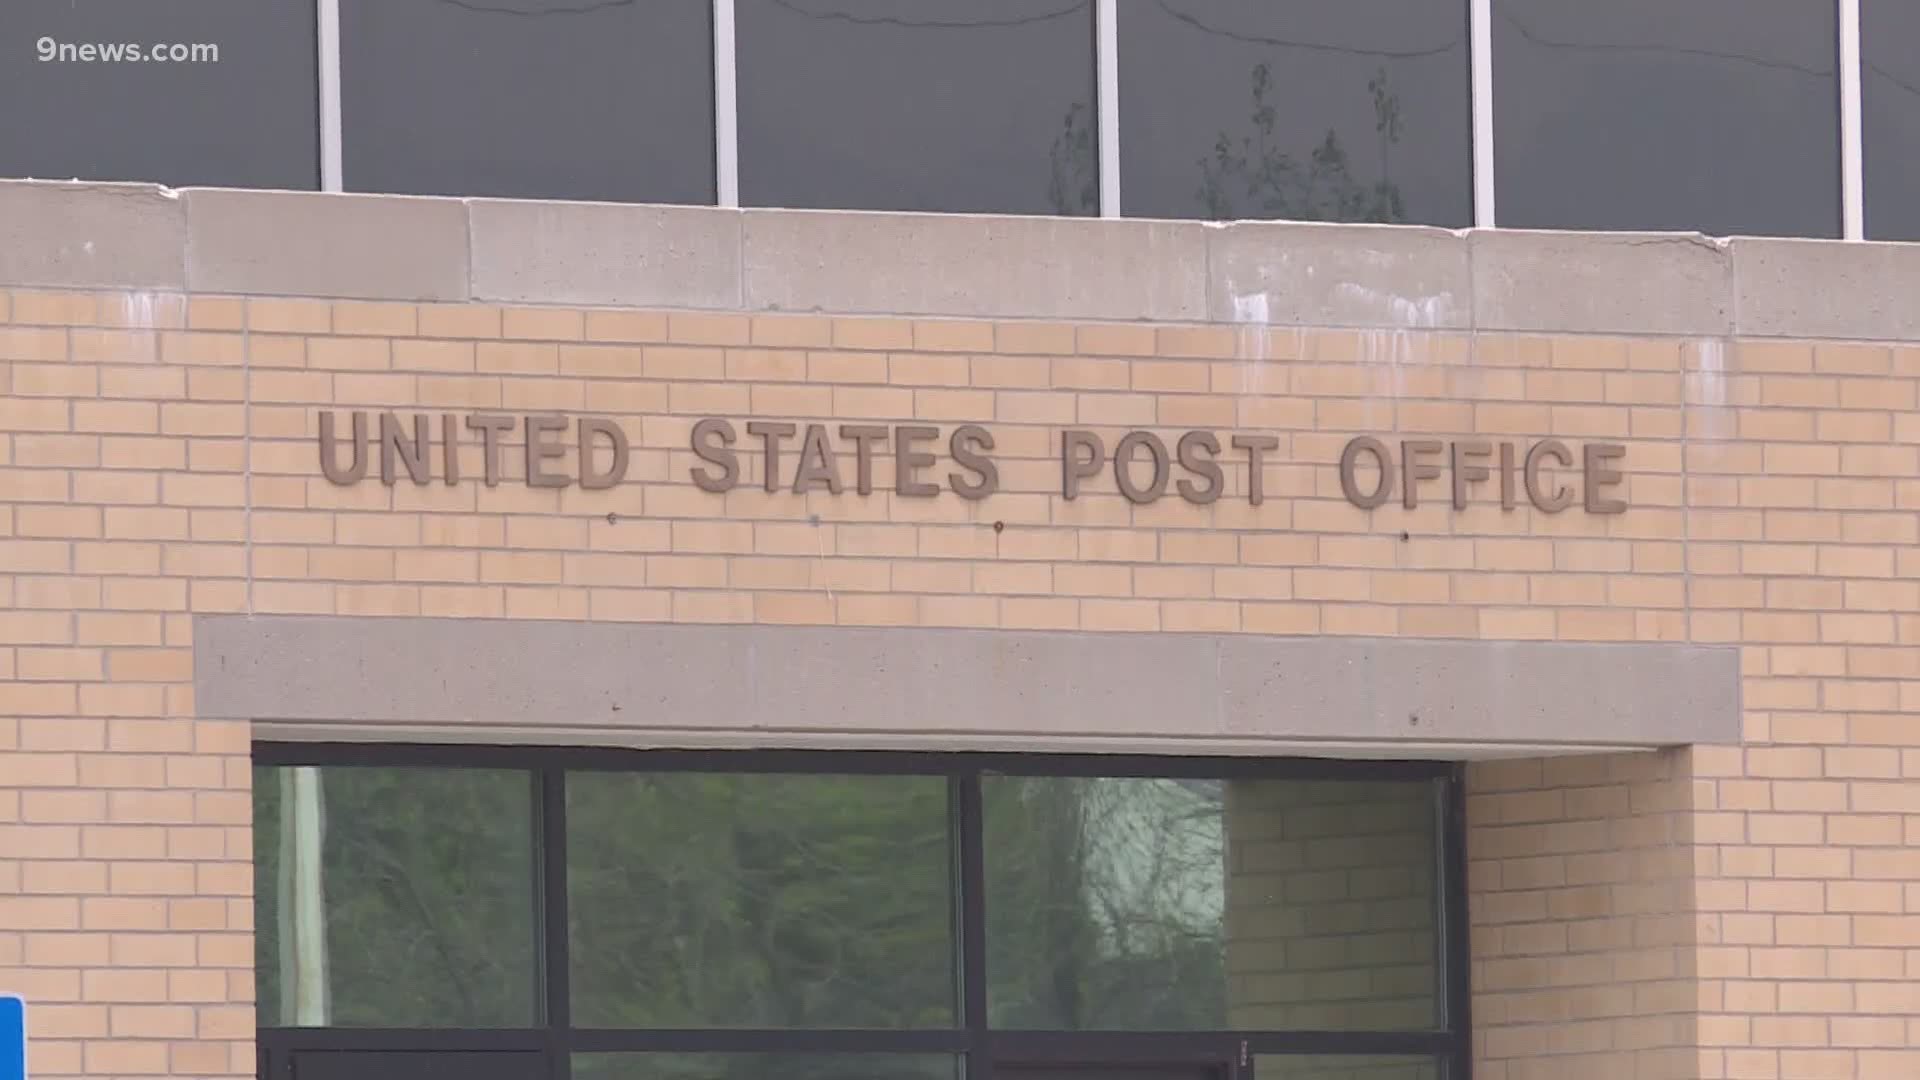 The United States Postal Service says it disagrees with the public health order and will follow federal directives instead.